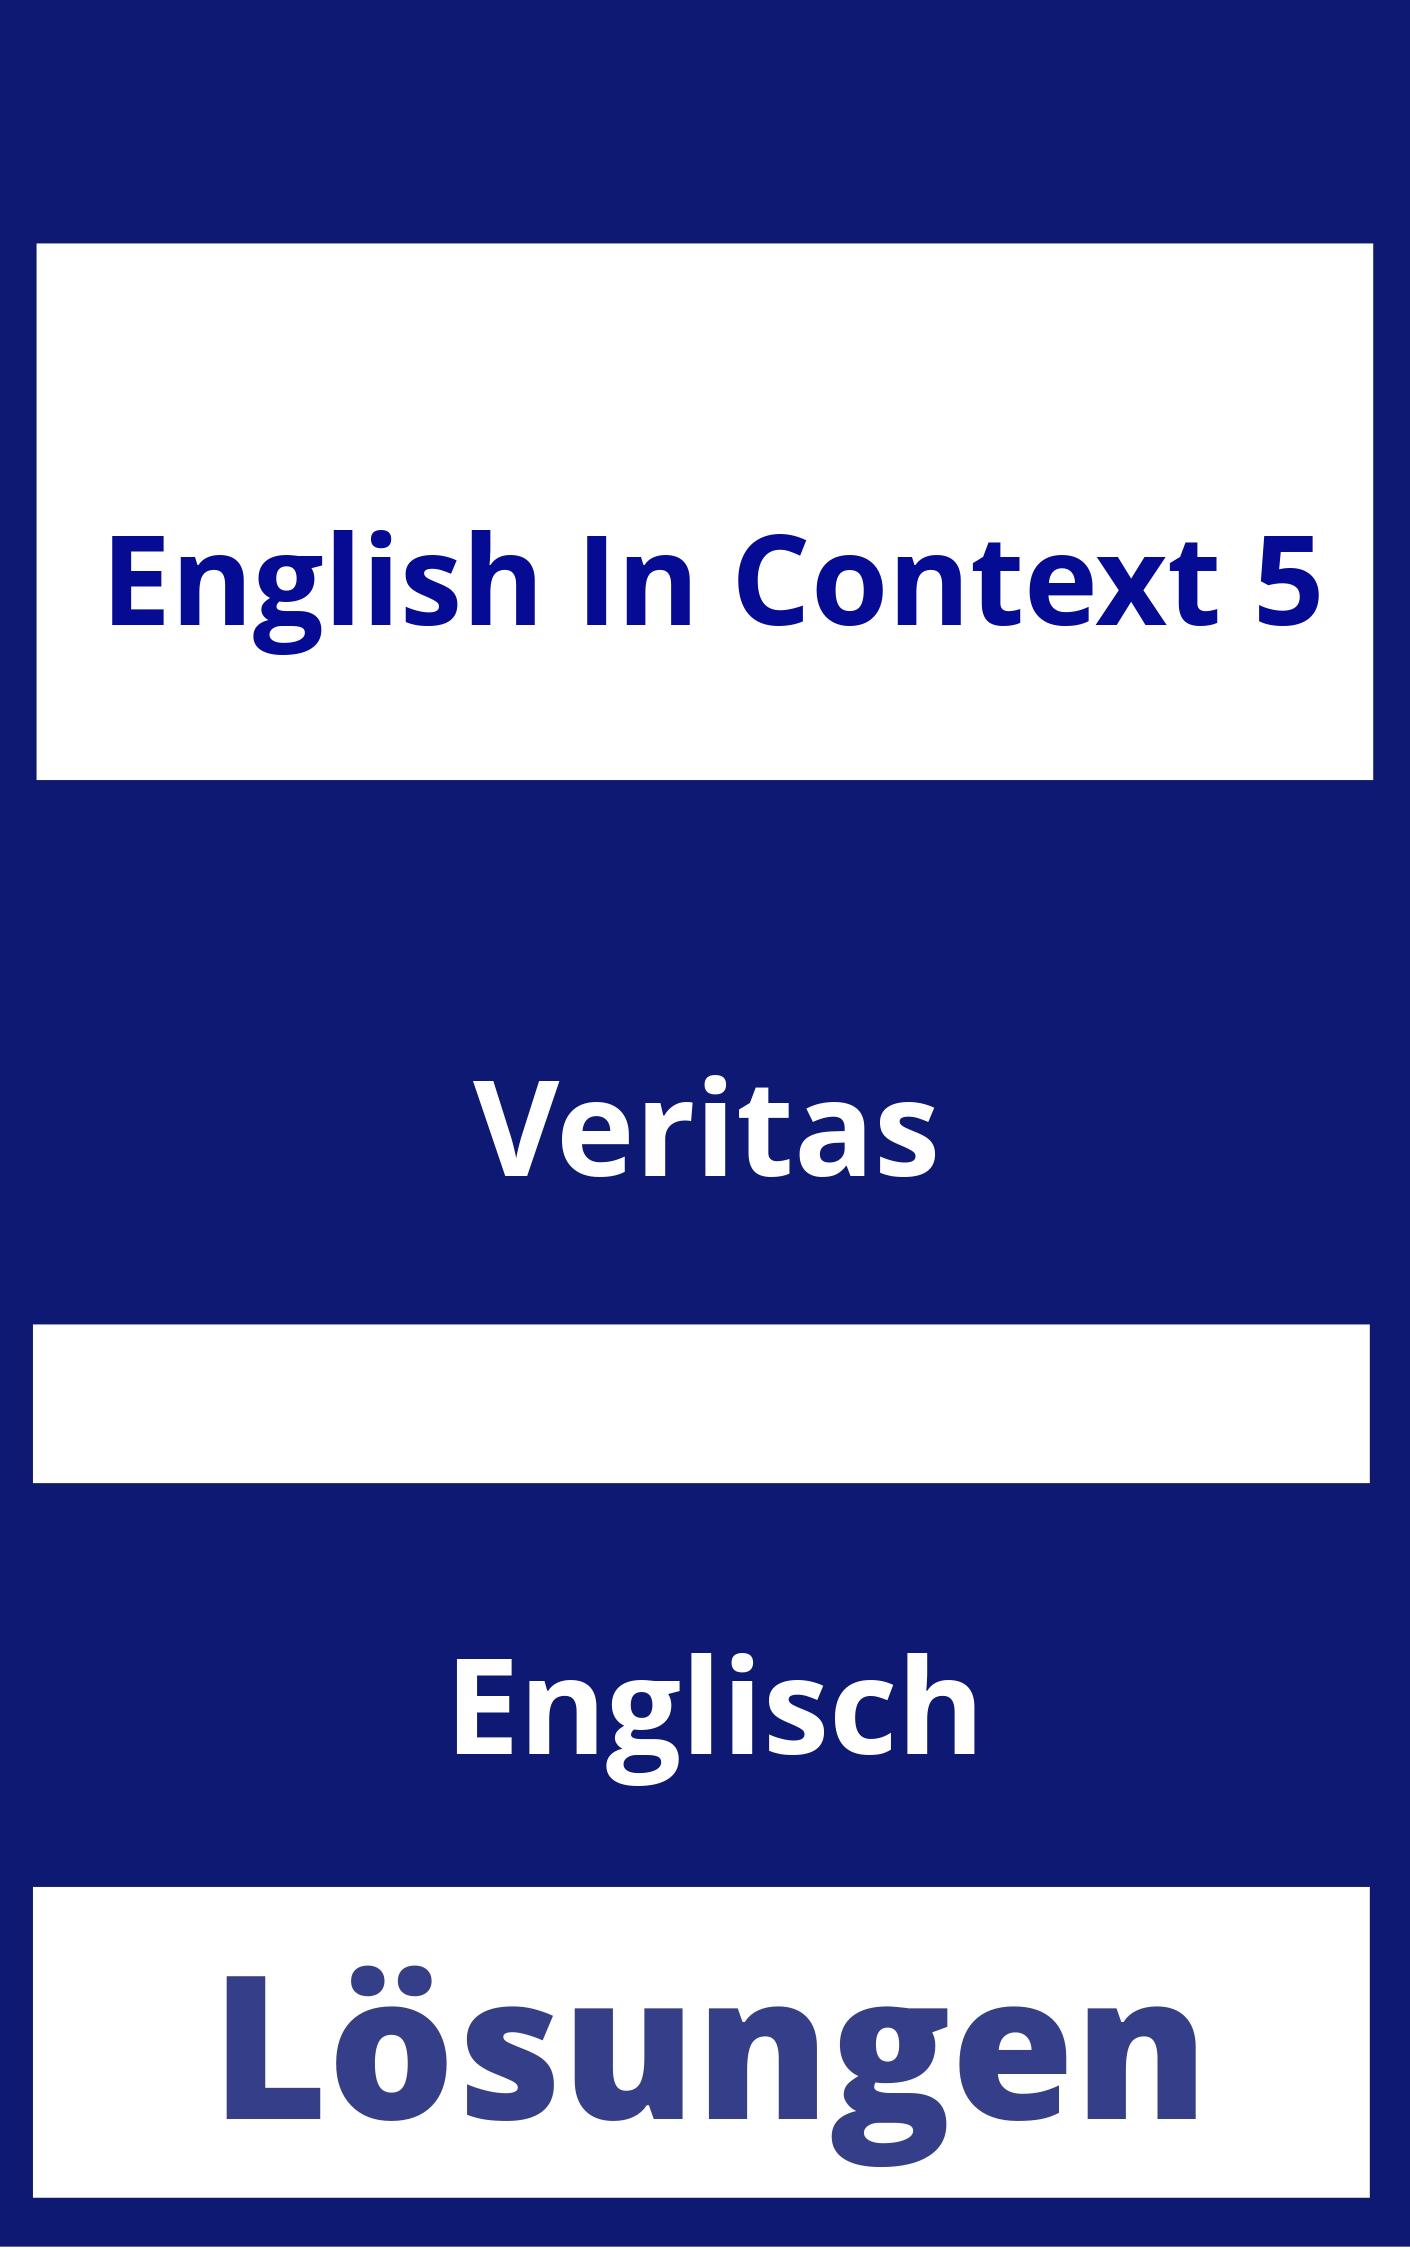 English in Context 5